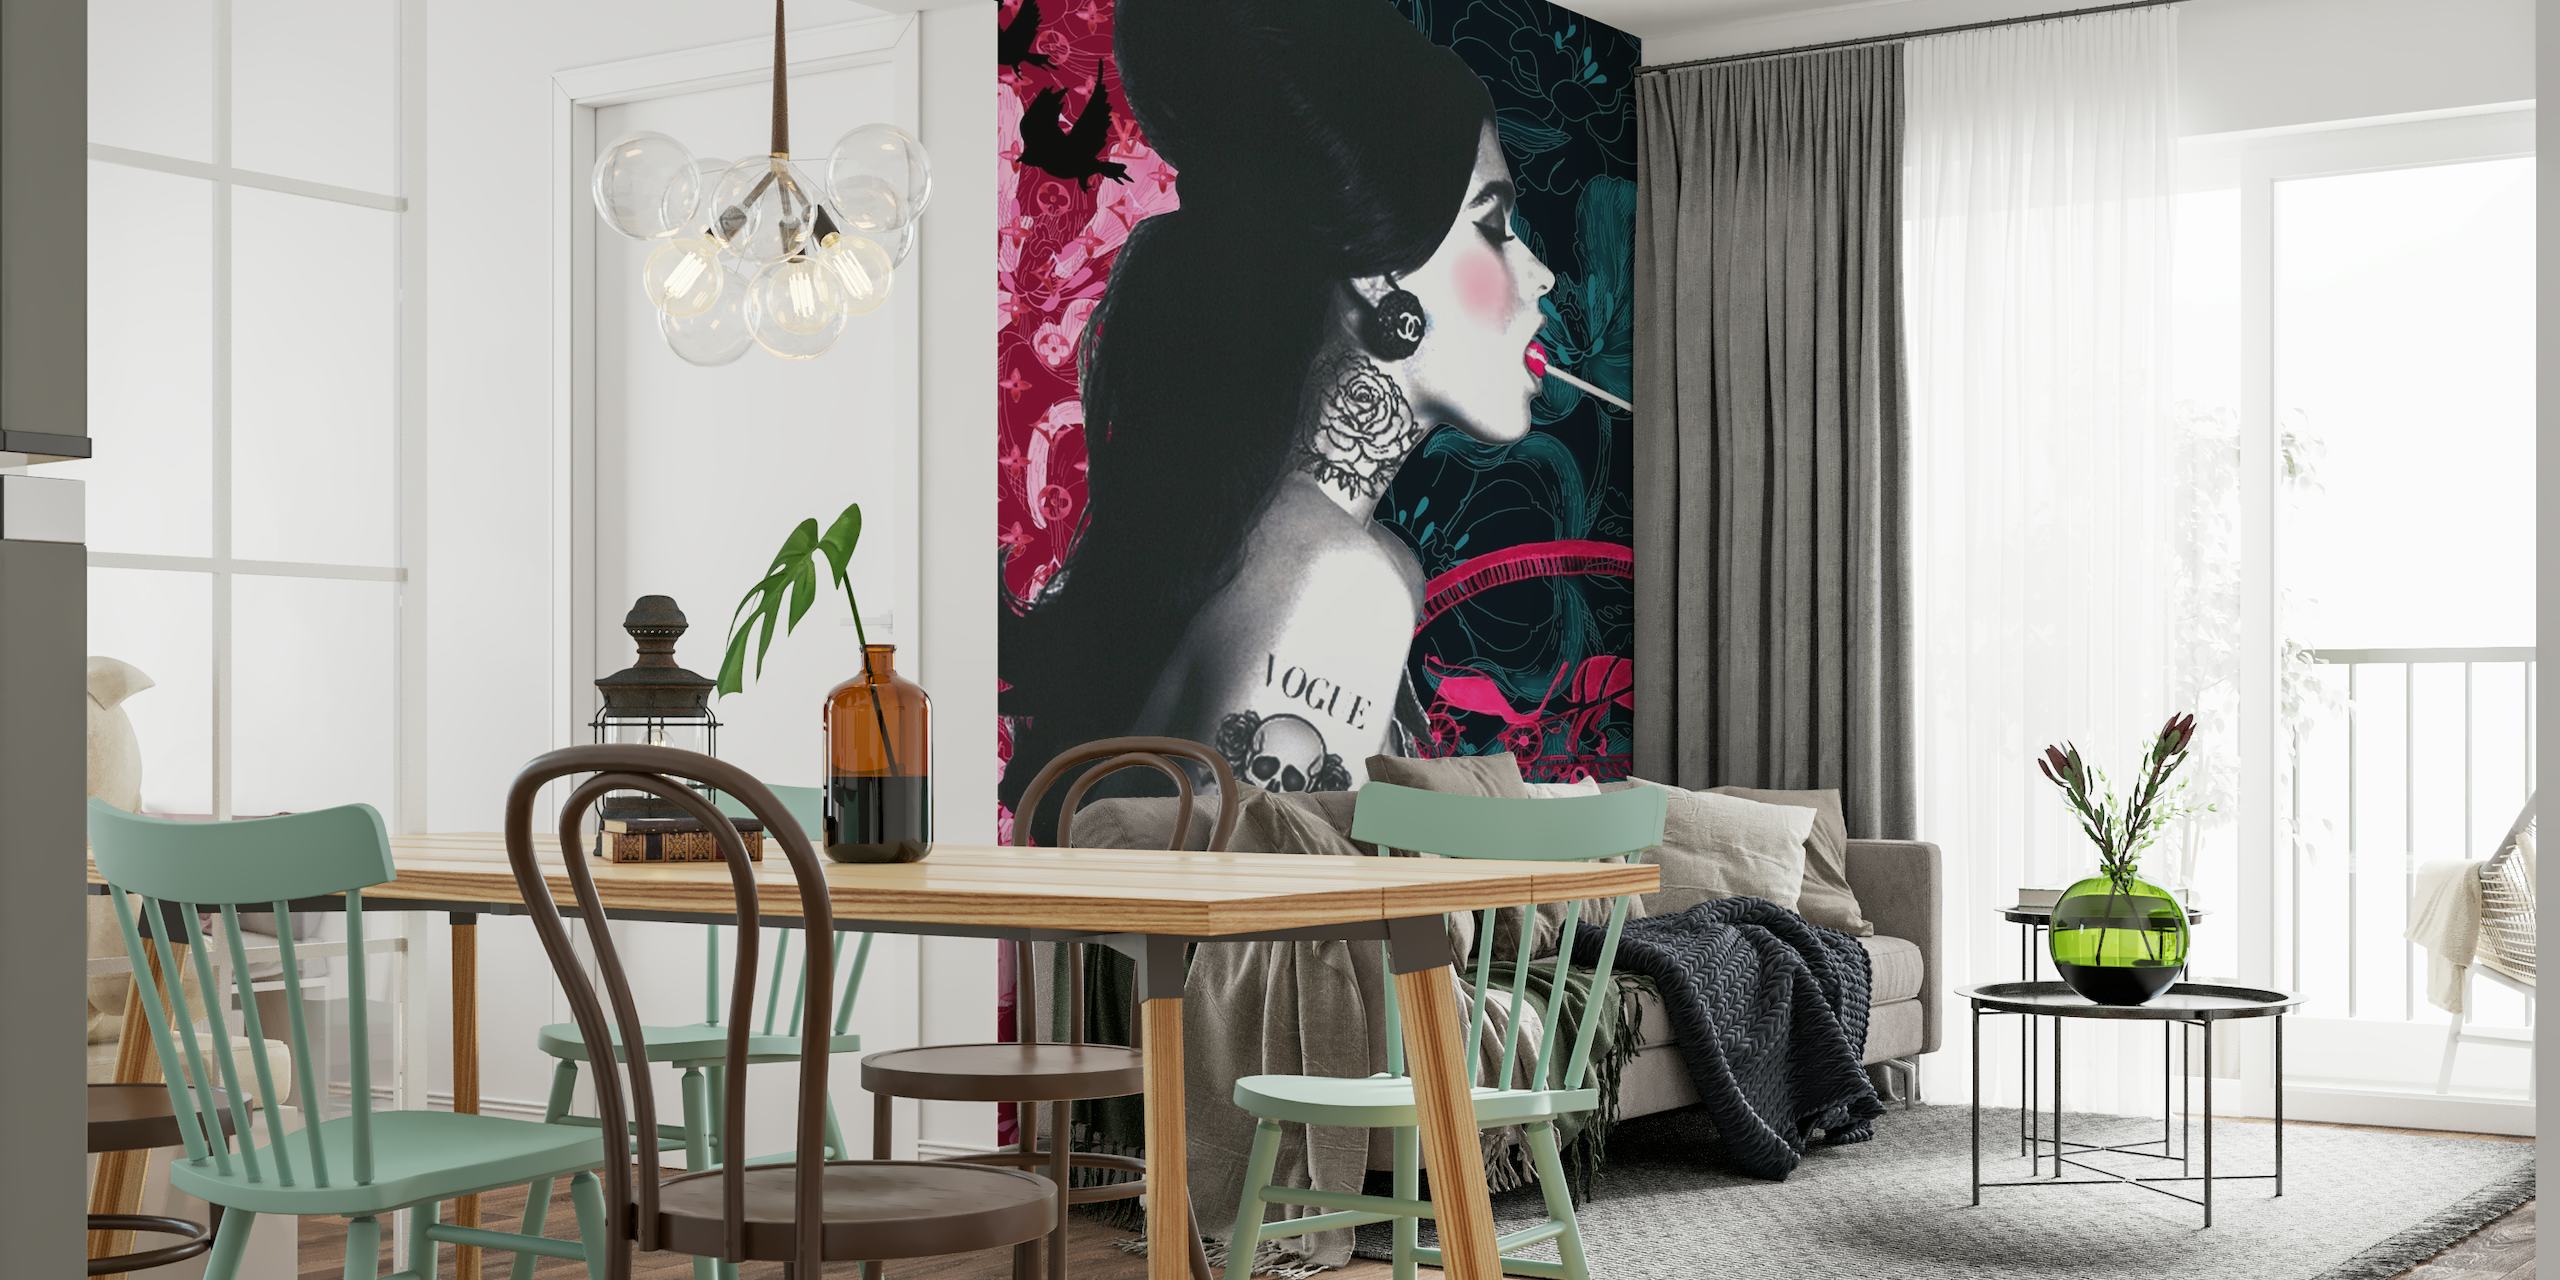 Lollipop Girl wall mural with dark tones and pink accents featuring a stylized portrait of a girl